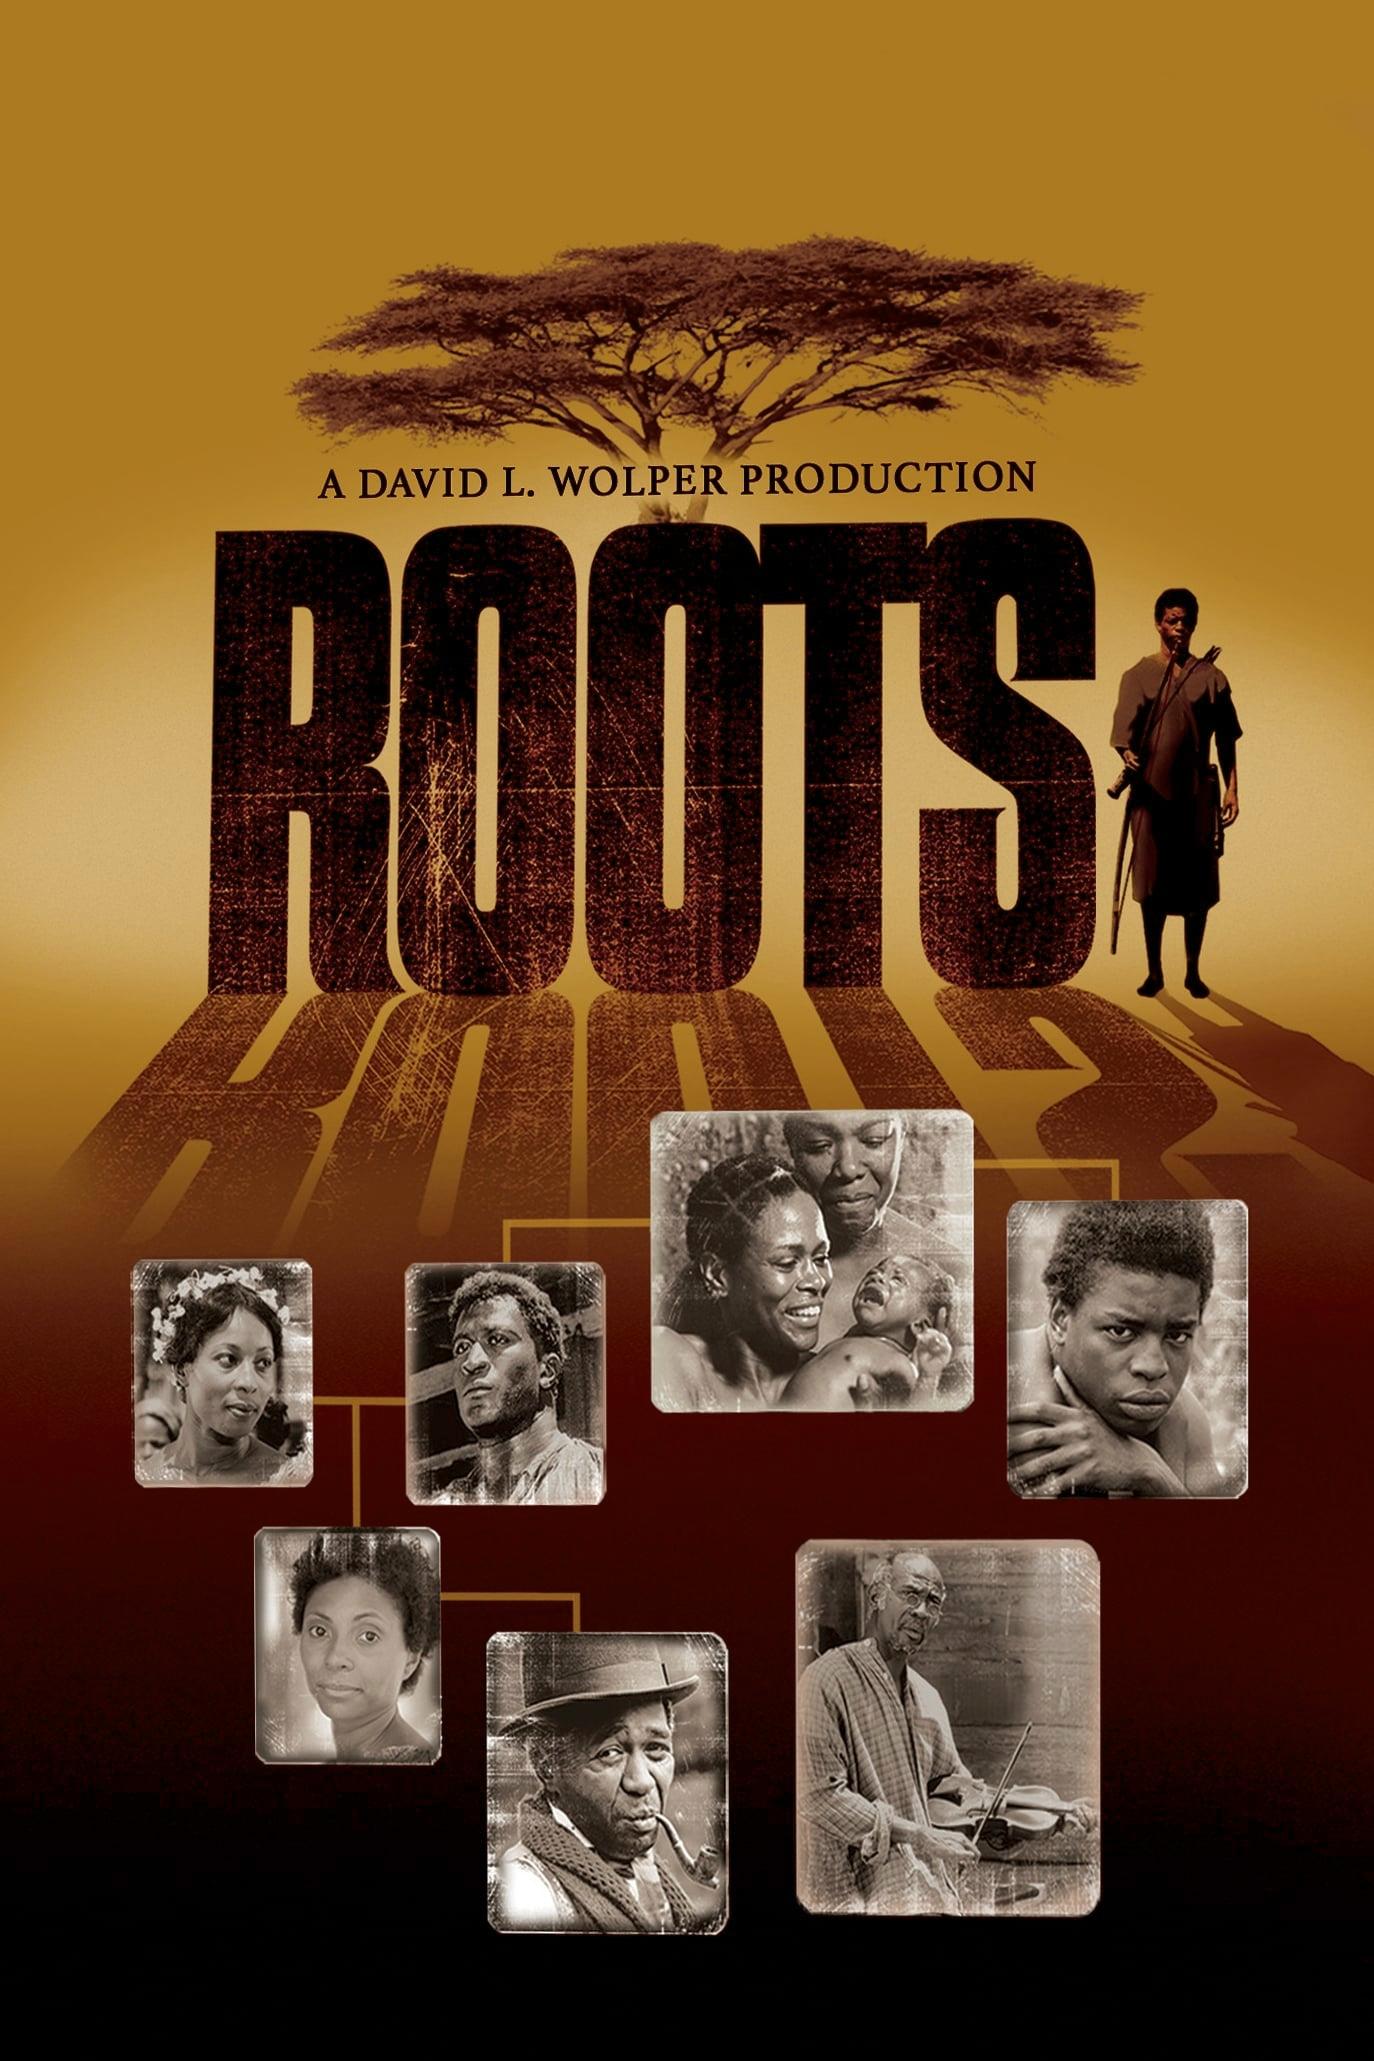 Roots poster